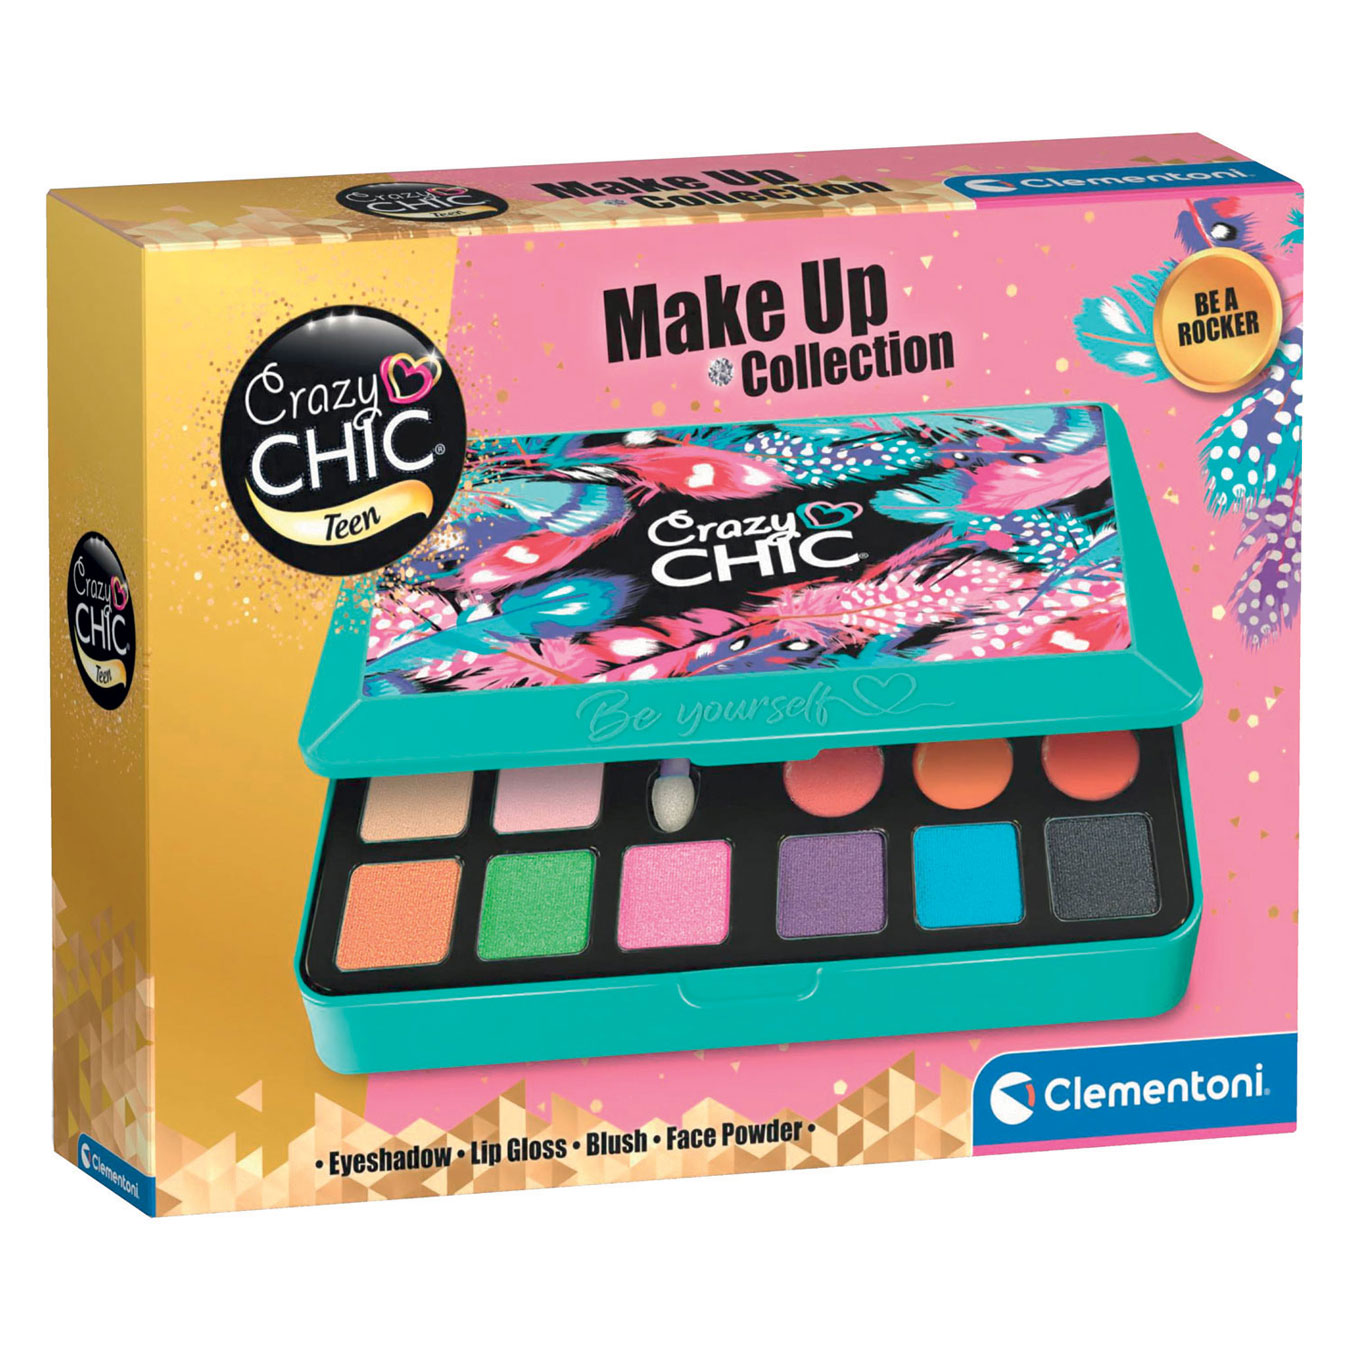 Clementoni Crazy Chic - Maquillage Be a Rocker